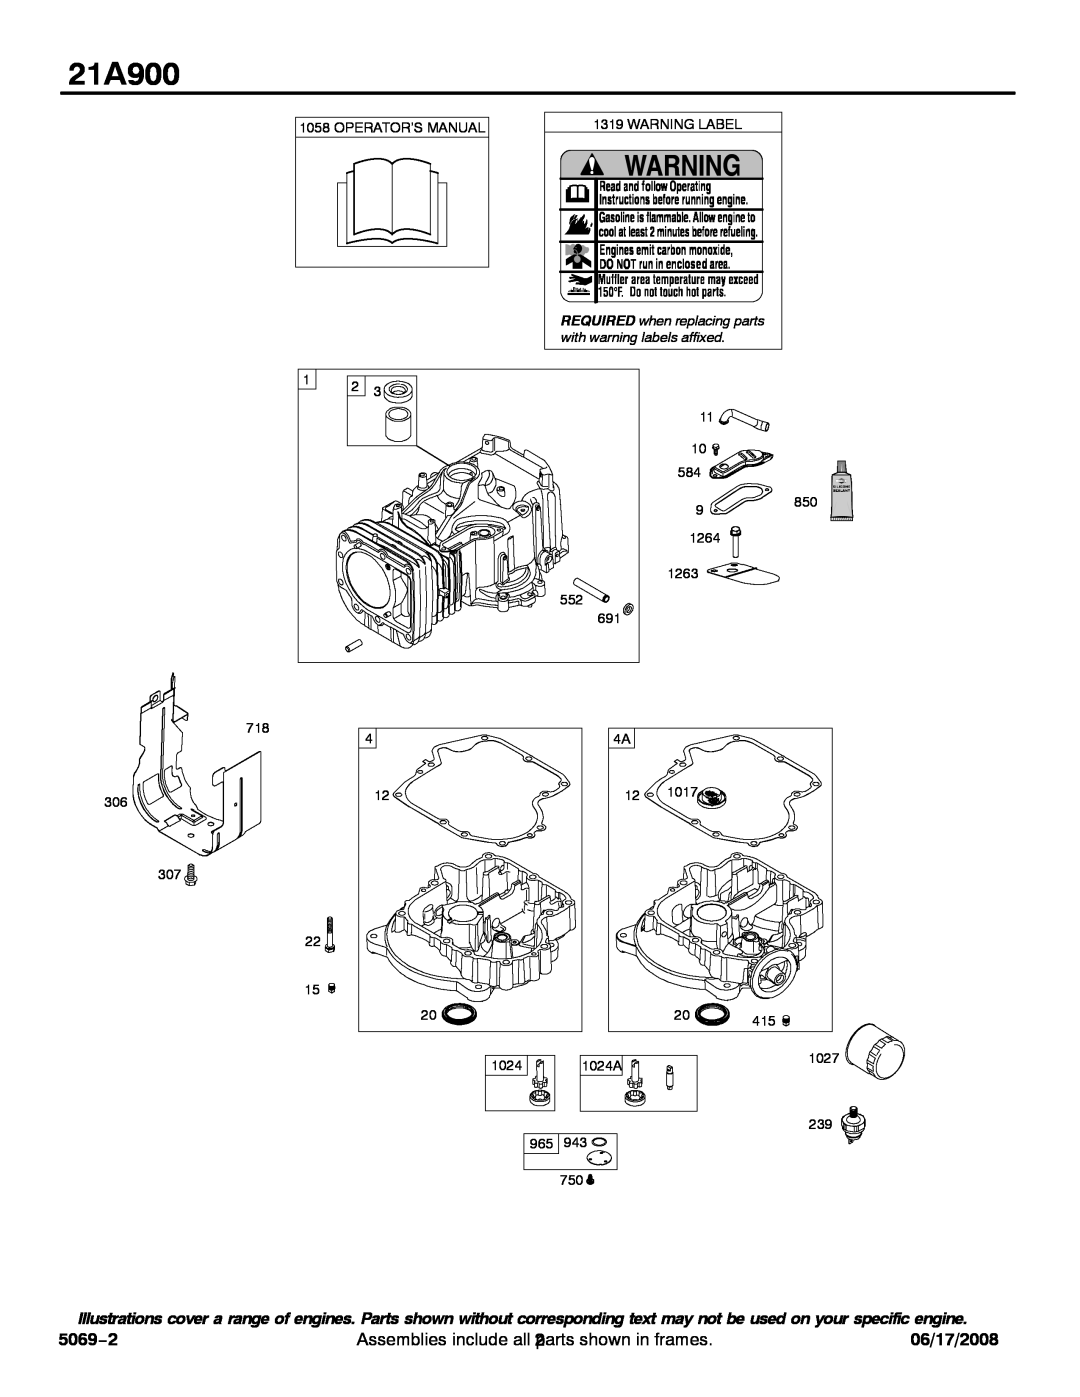 Briggs & Stratton 21A900 5069−2, Assemblies include all 2parts shown in frames, 06/17/2008, with warning labels affixed 